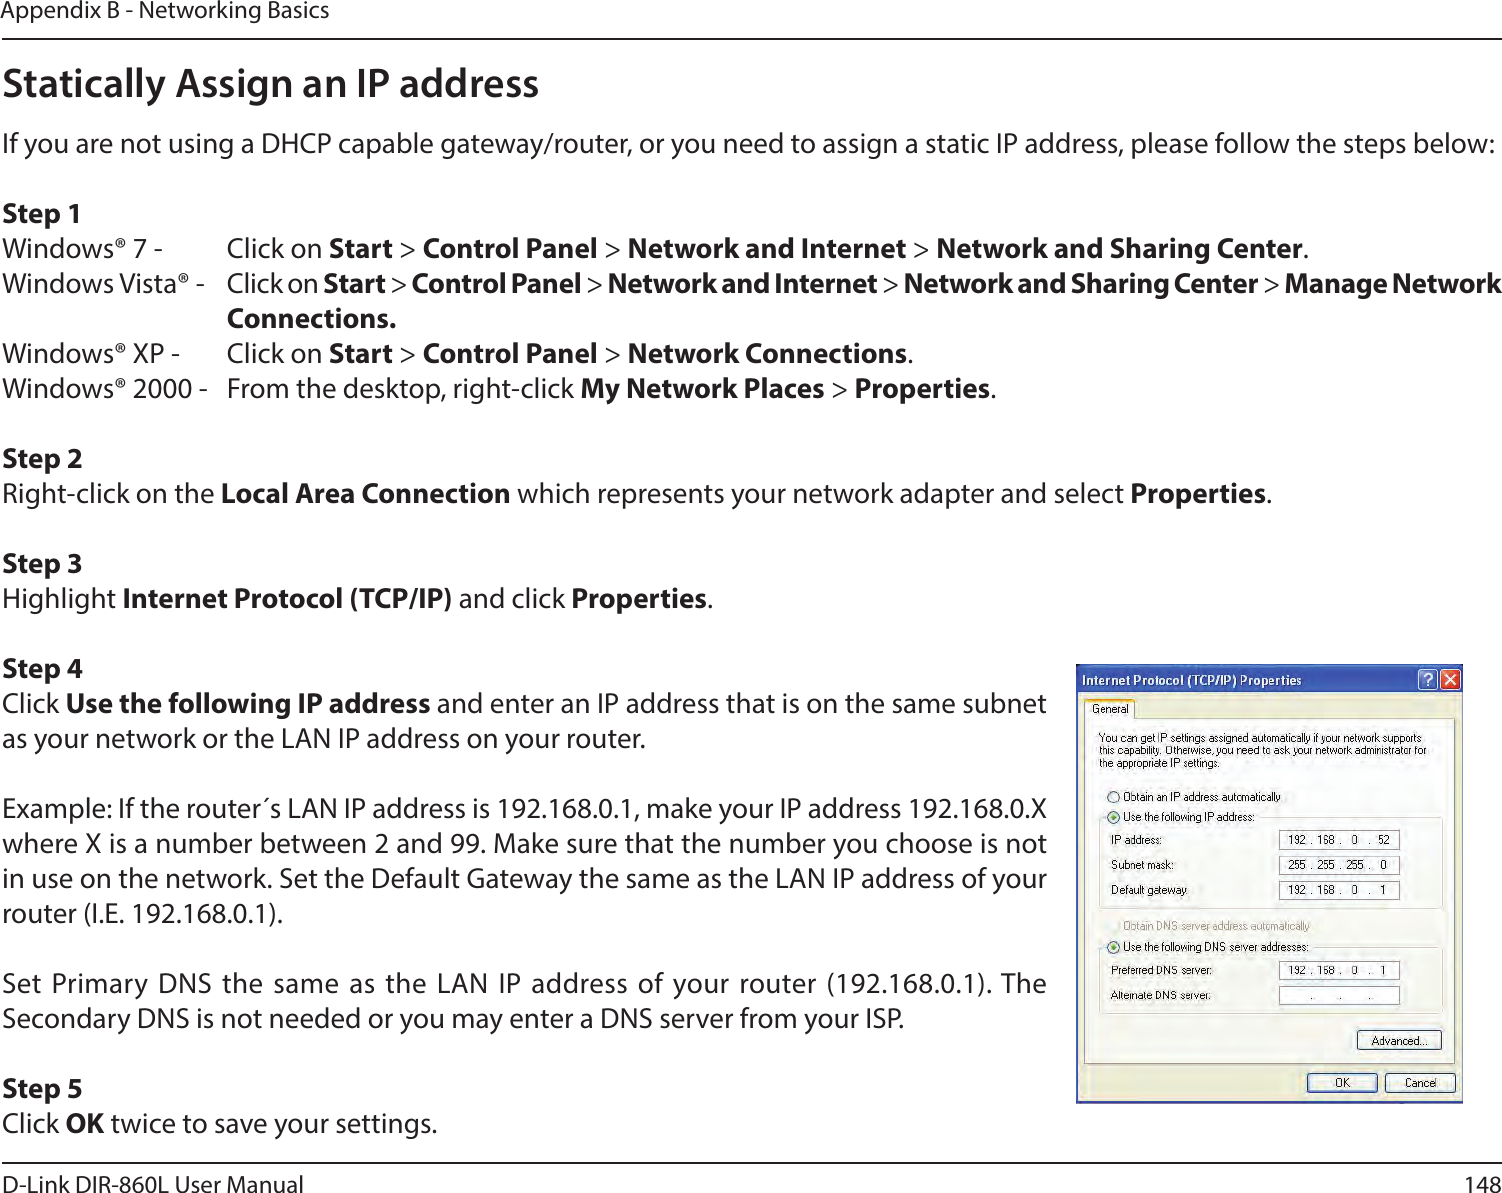 148D-Link DIR-860L User ManualAppendix B - Networking BasicsStatically Assign an IP addressIf you are not using a DHCP capable gateway/router, or you need to assign a static IP address, please follow the steps below:Step 1Windows® 7 -  Click on Start &gt; Control Panel &gt; Network and Internet &gt; Network and Sharing Center.Windows Vista® -  Click on Start &gt; Control Panel &gt; Network and Internet &gt; Network and Sharing Center &gt; Manage Network      Connections.Windows® XP -  Click on Start &gt; Control Panel &gt; Network Connections.Windows® 2000 -  From the desktop, right-click My Network Places &gt; Properties.Step 2Right-click on the Local Area Connection which represents your network adapter and select Properties.Step 3Highlight Internet Protocol (TCP/IP) and click Properties.Step 4Click Use the following IP address and enter an IP address that is on the same subnet as your network or the LAN IP address on your router. Example: If the router´s LAN IP address is 192.168.0.1, make your IP address 192.168.0.X where X is a number between 2 and 99. Make sure that the number you choose is not in use on the network. Set the Default Gateway the same as the LAN IP address of your router (I.E. 192.168.0.1). Set Primary DNS the same as the LAN IP address of your router (192.168.0.1). The Secondary DNS is not needed or you may enter a DNS server from your ISP.Step 5Click OK twice to save your settings.